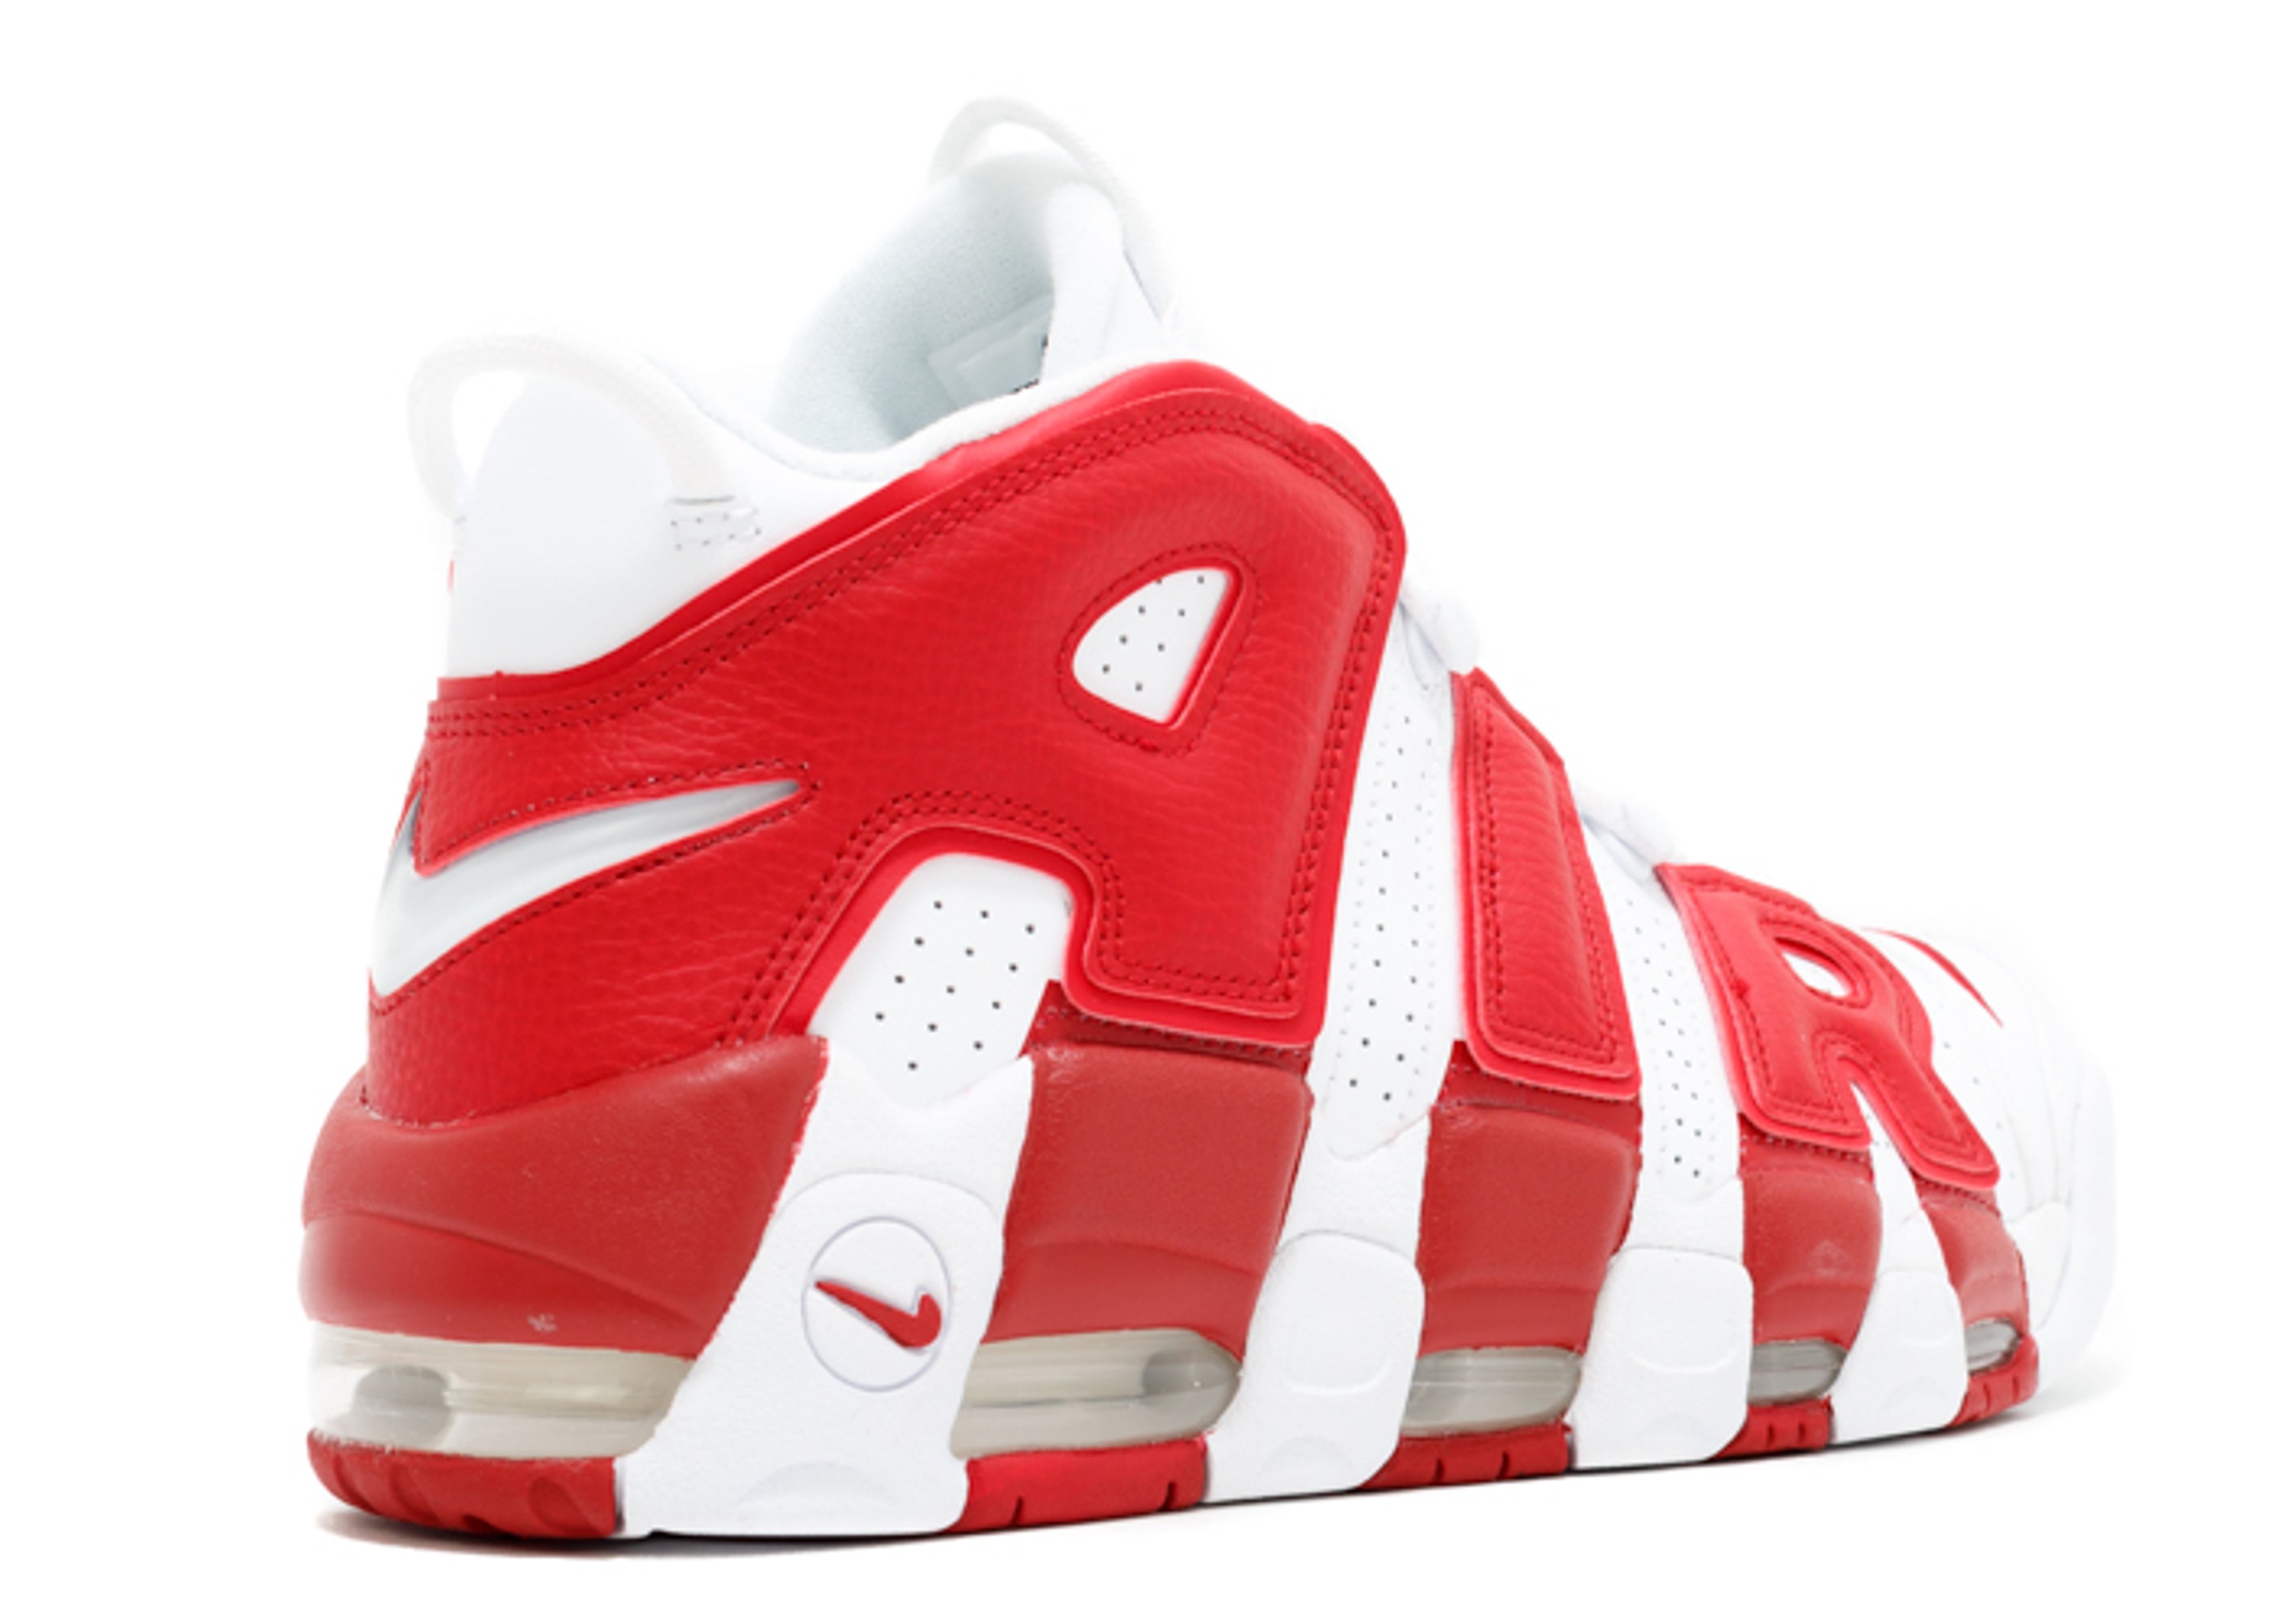 Nike Air more Uptempo 96 White Red. Nike Air more Uptempo Red White. Nike Uptempo White Gym Red. Nike Air Uptempo White Red. Nike air more uptempo red